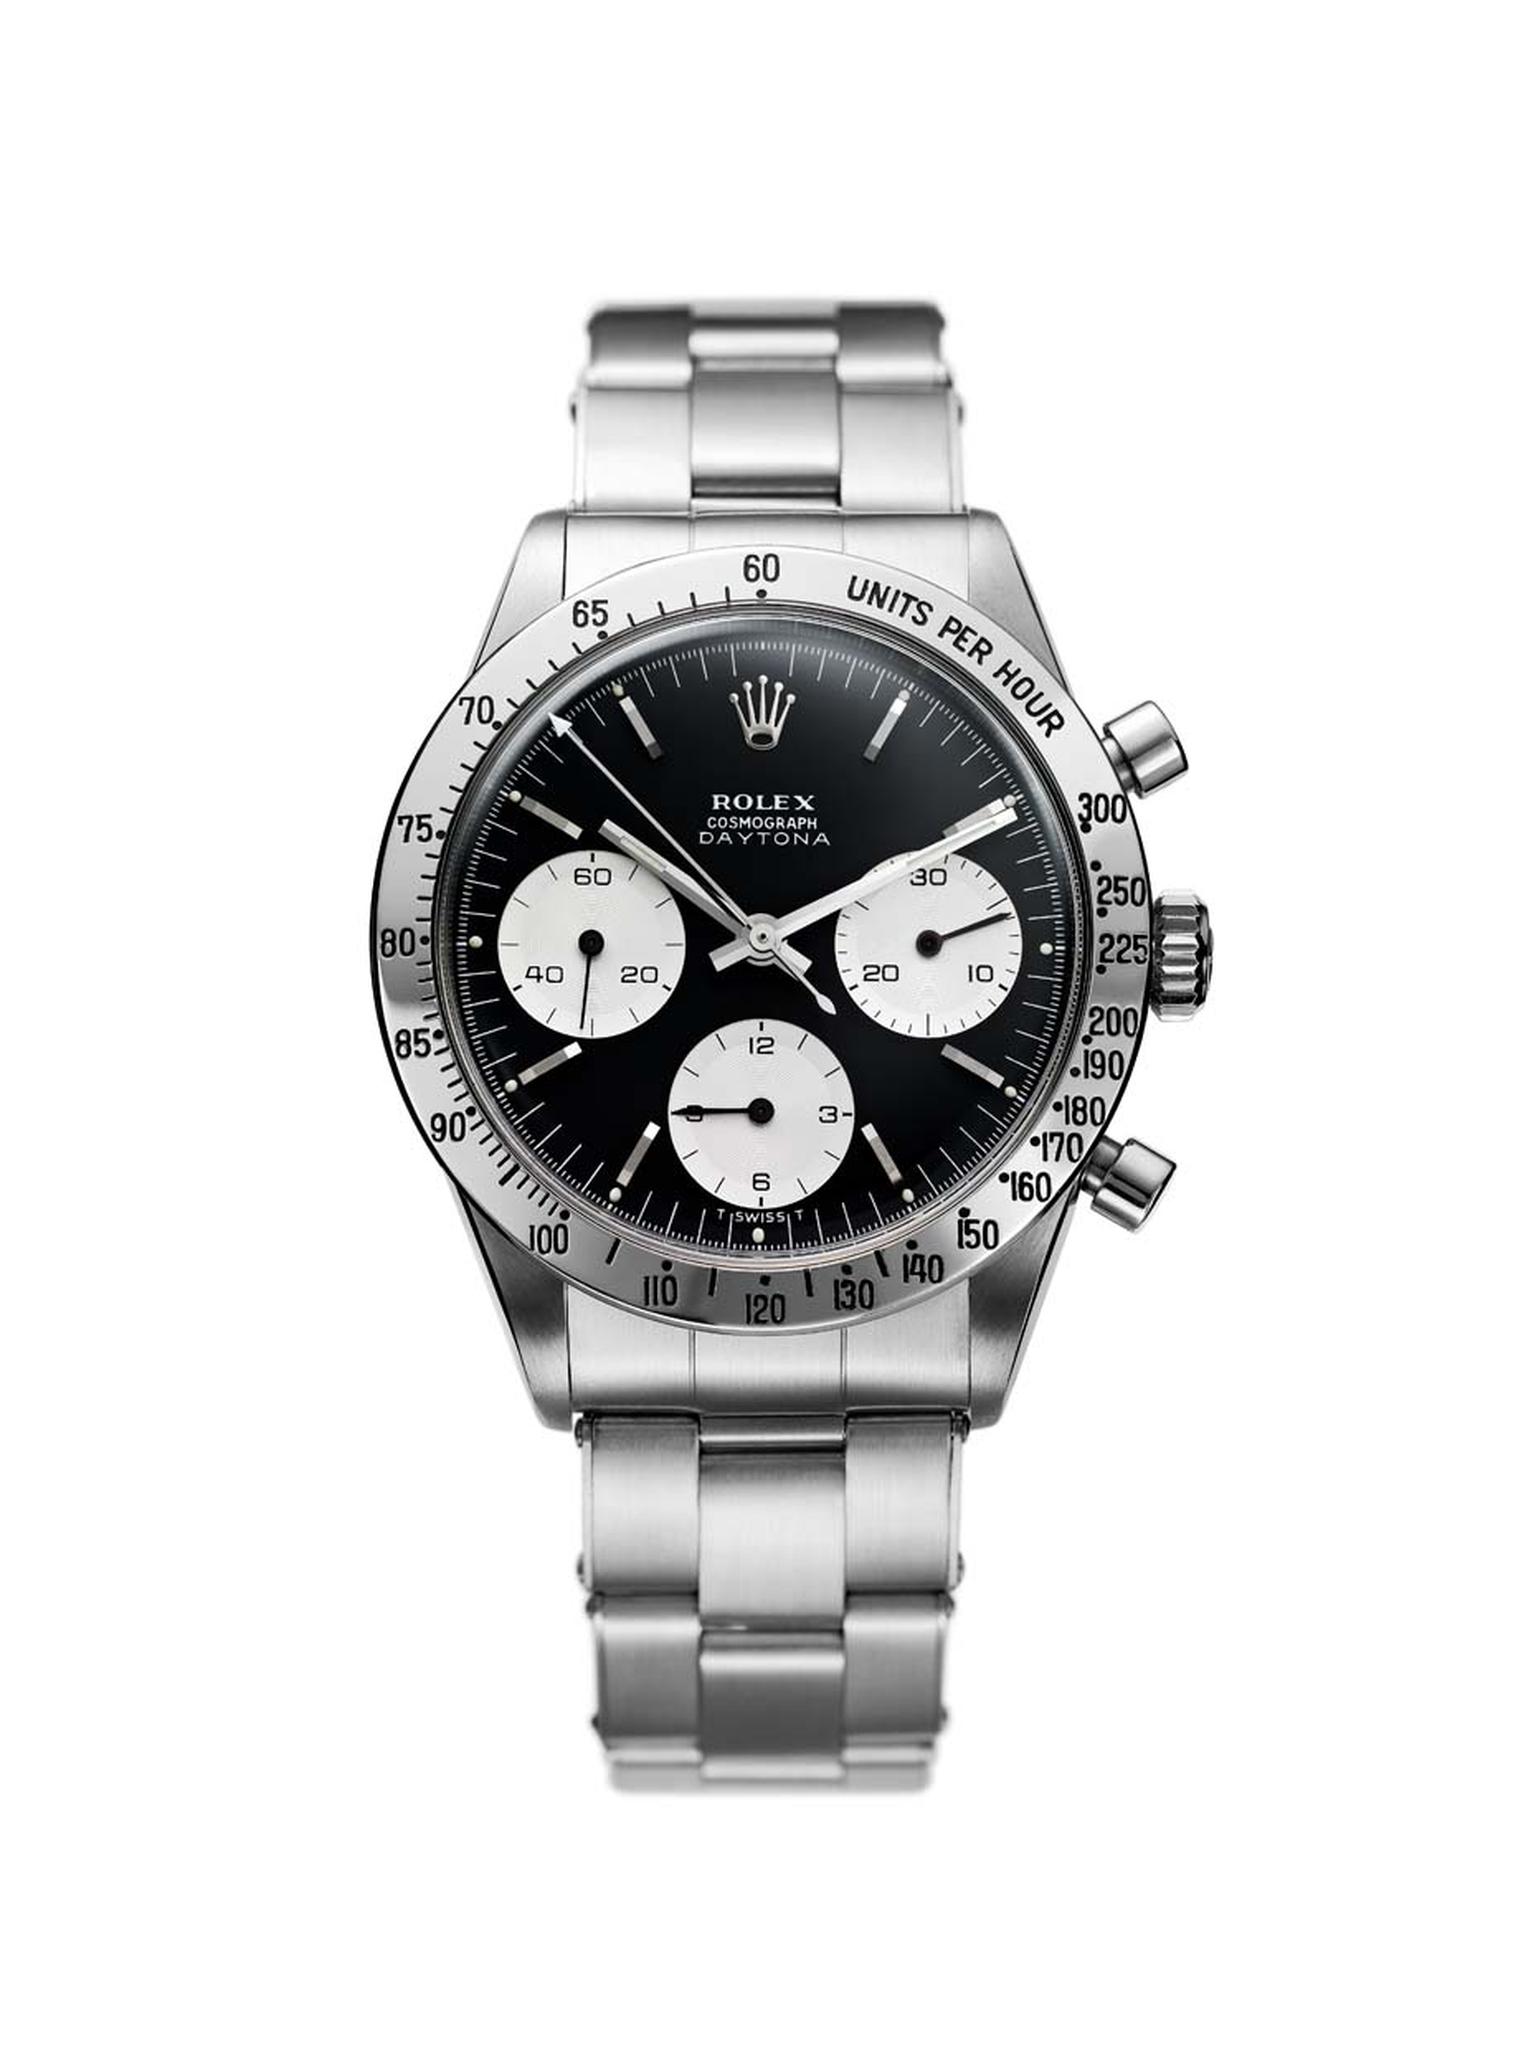 Rolex Cosmograph Daytona 1963 is, for many enthusiasts, the world's most iconic sports chronograph thanks to its bold design and impeccable performance.